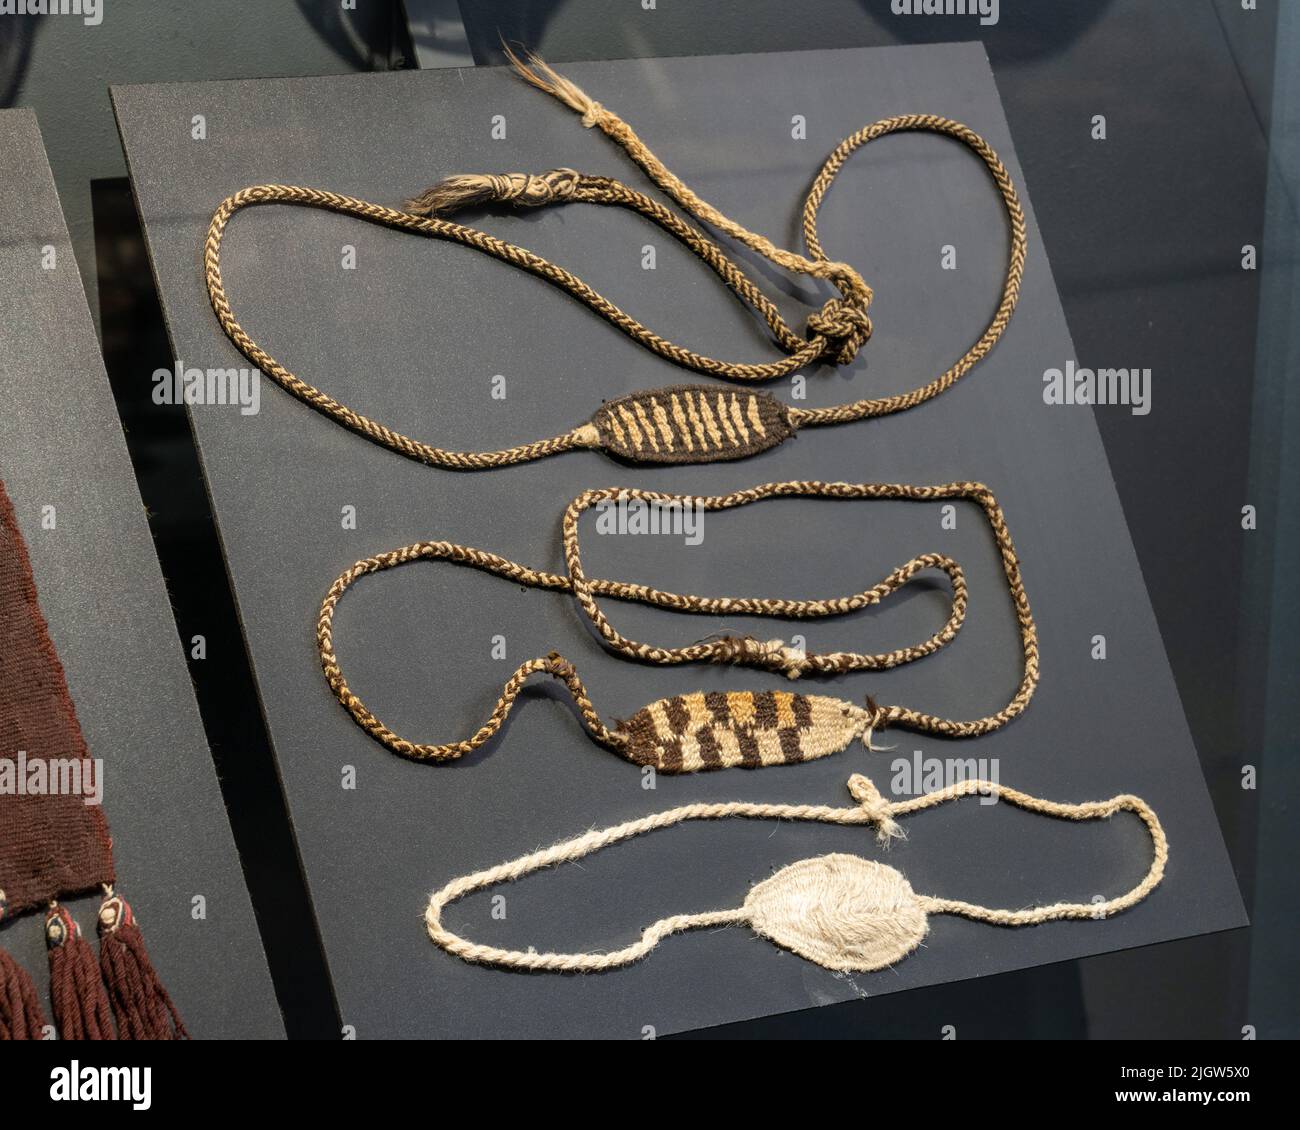 Slings as weapons from the Andean culture about 1000 A.D. in the San Miguel de Azapa Archeological Museum in Chile. Stock Photo